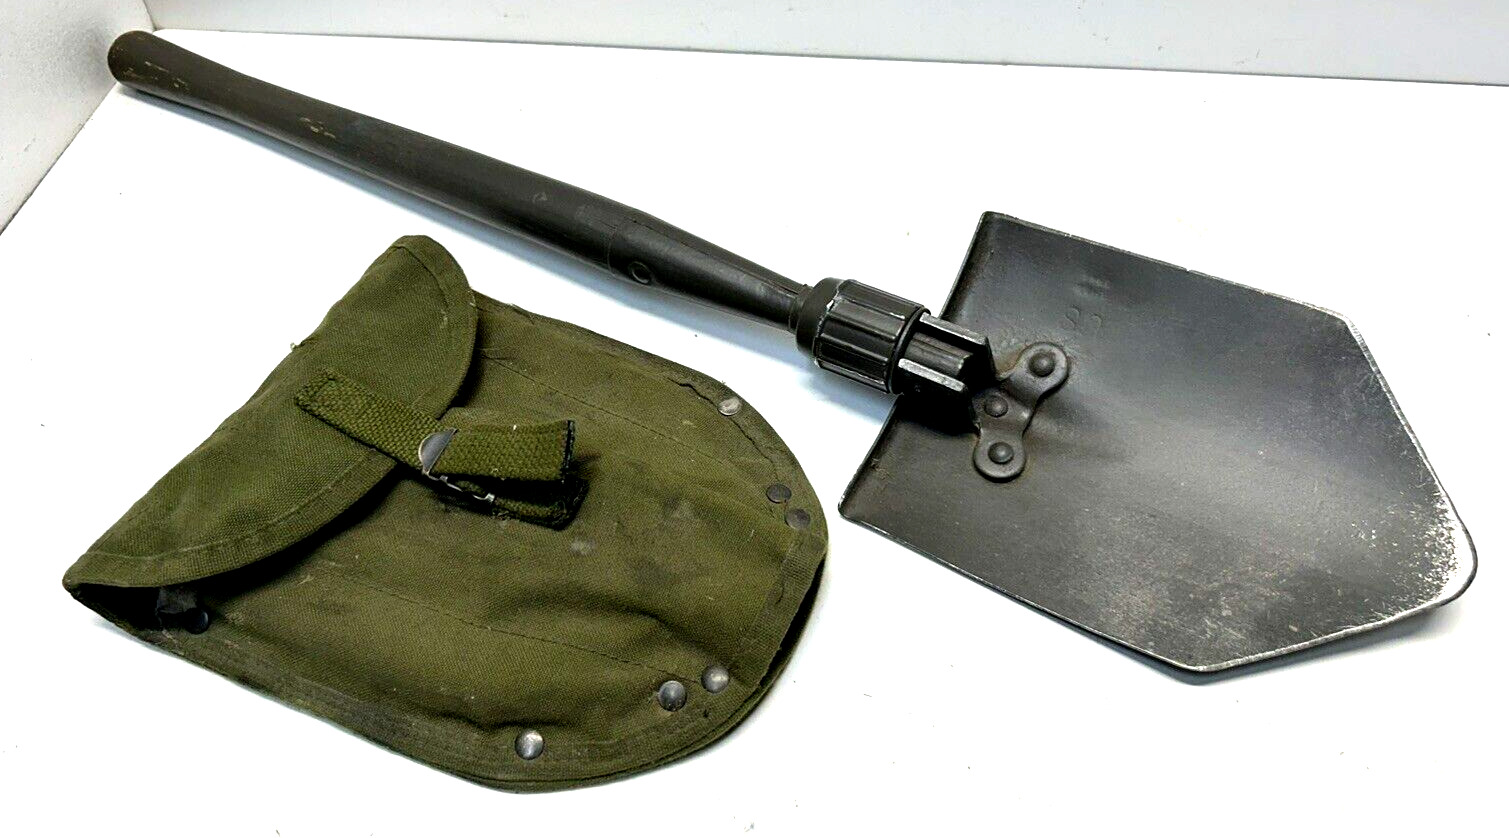 U.S. Army 1944 AMES Entrenching Shovel With Cover Survival